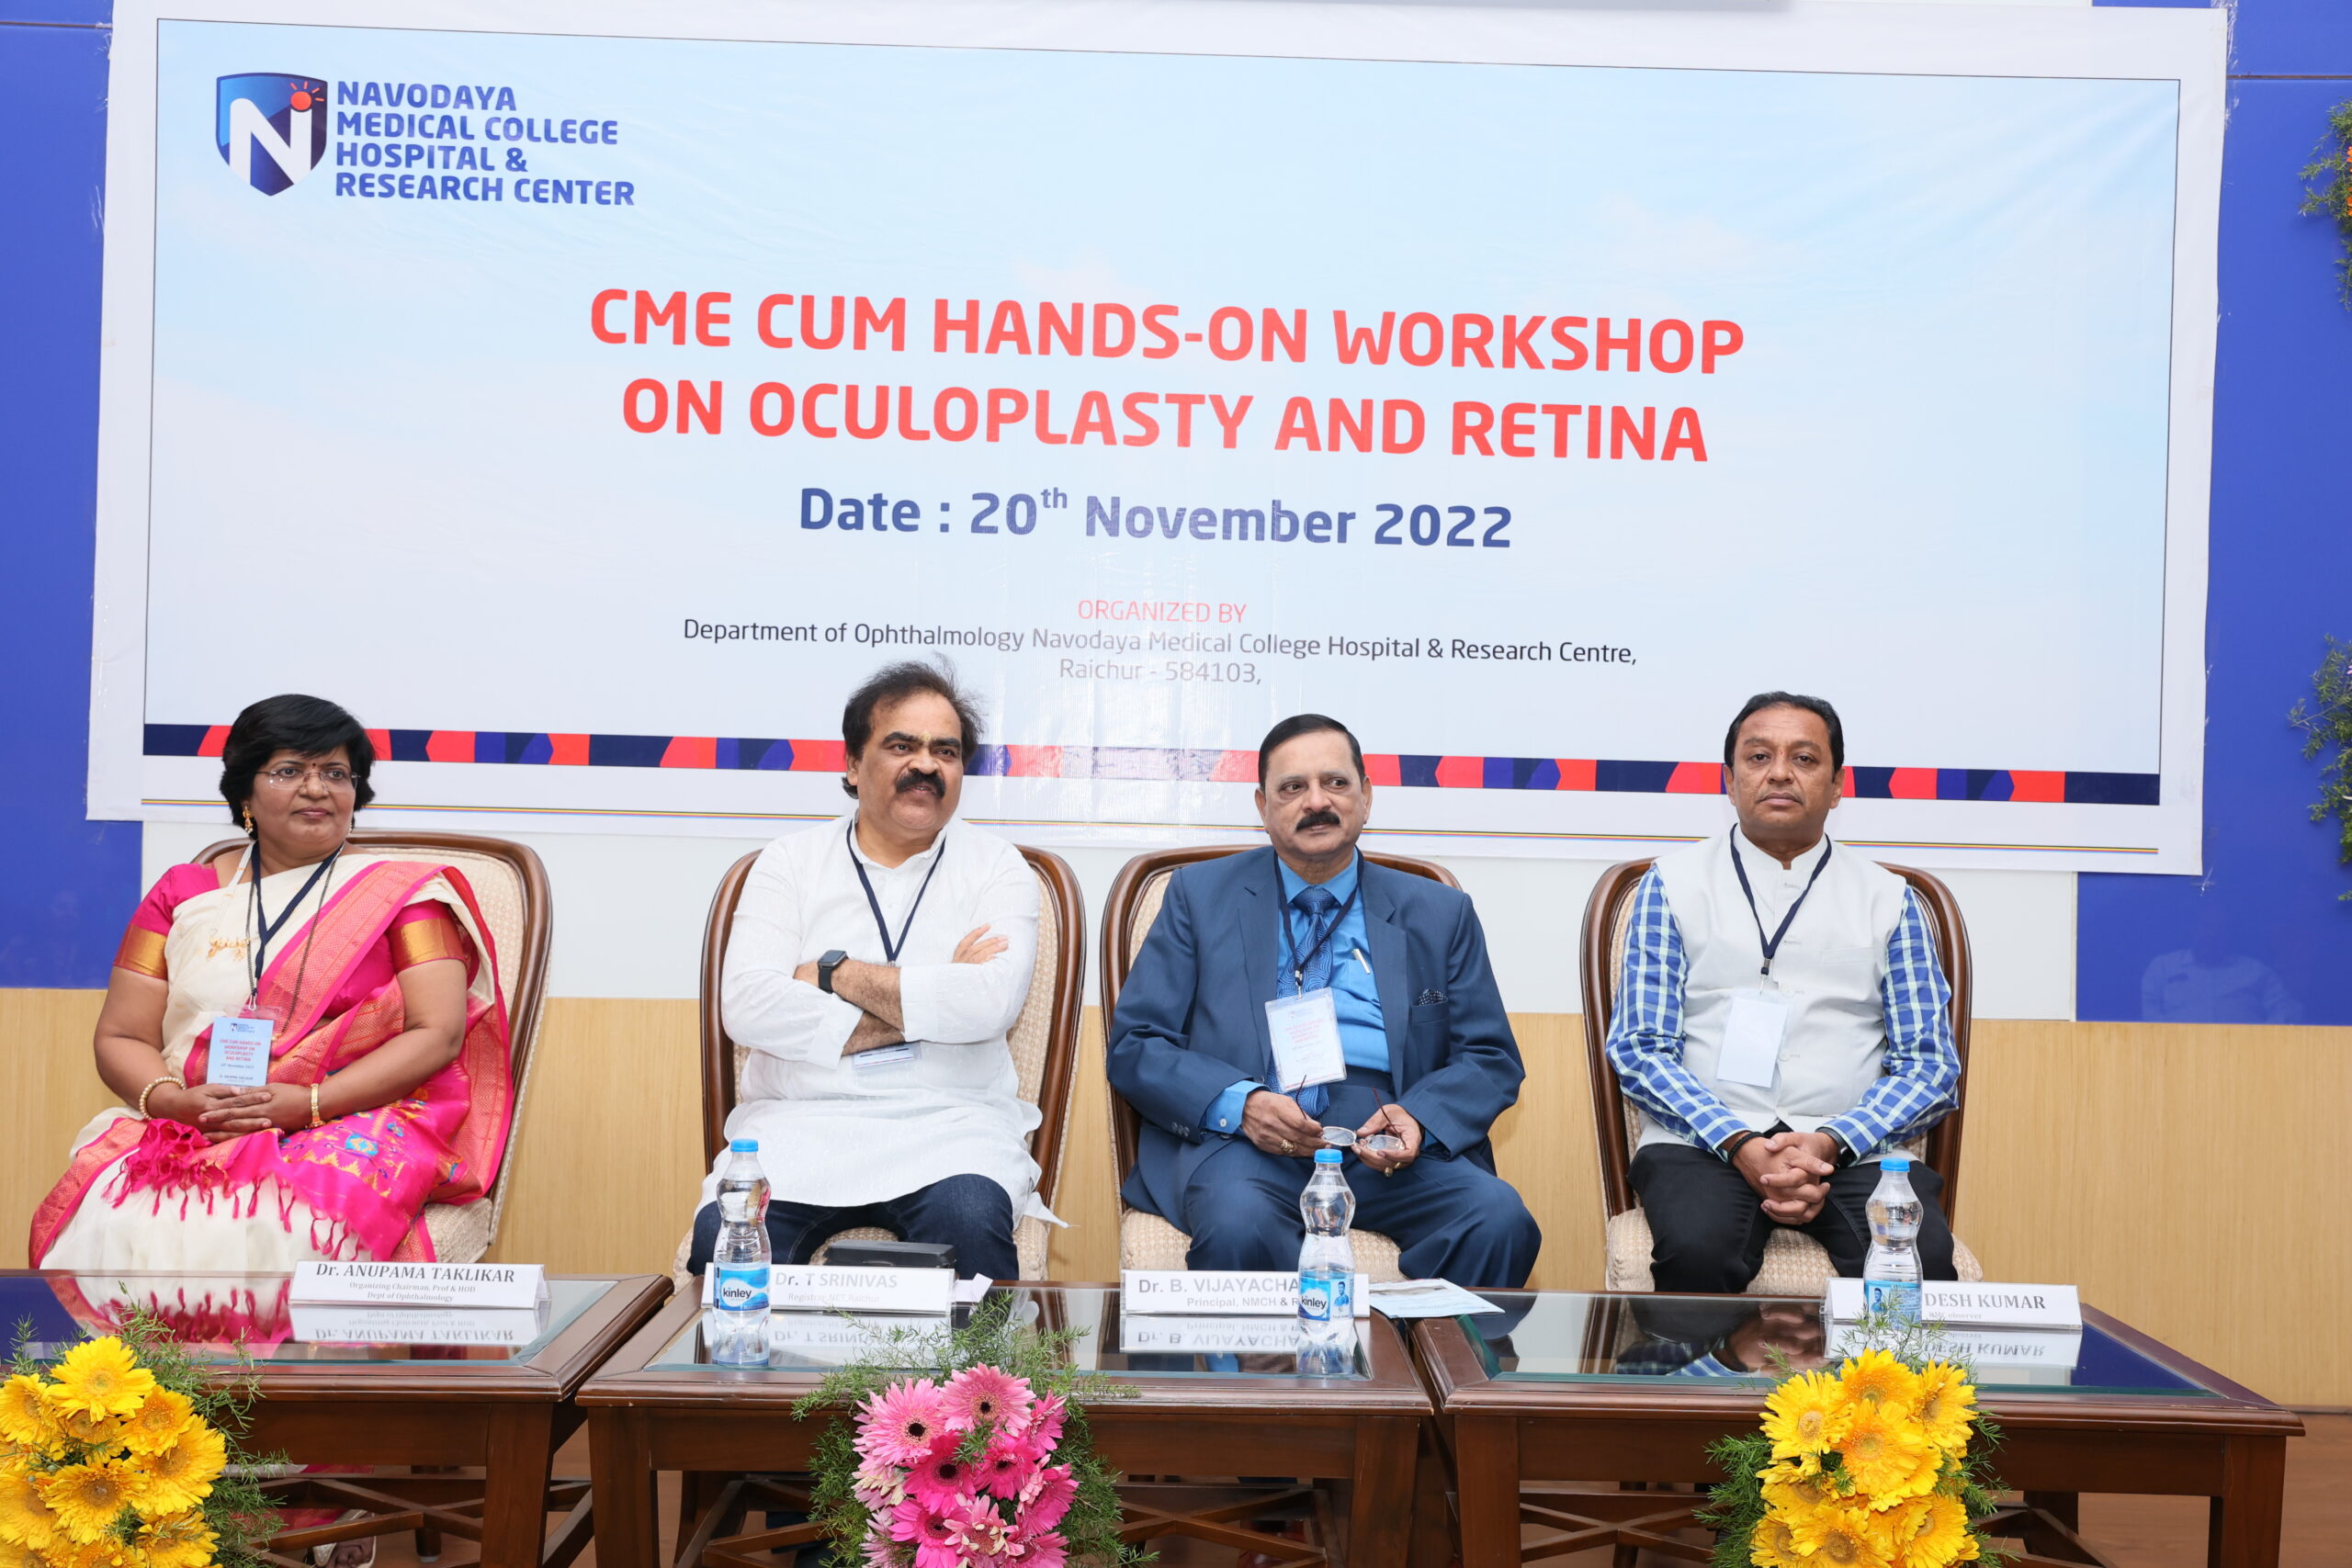 CME and workshop on Oculoplasty and Retina conducted by Department of Ophthalmology